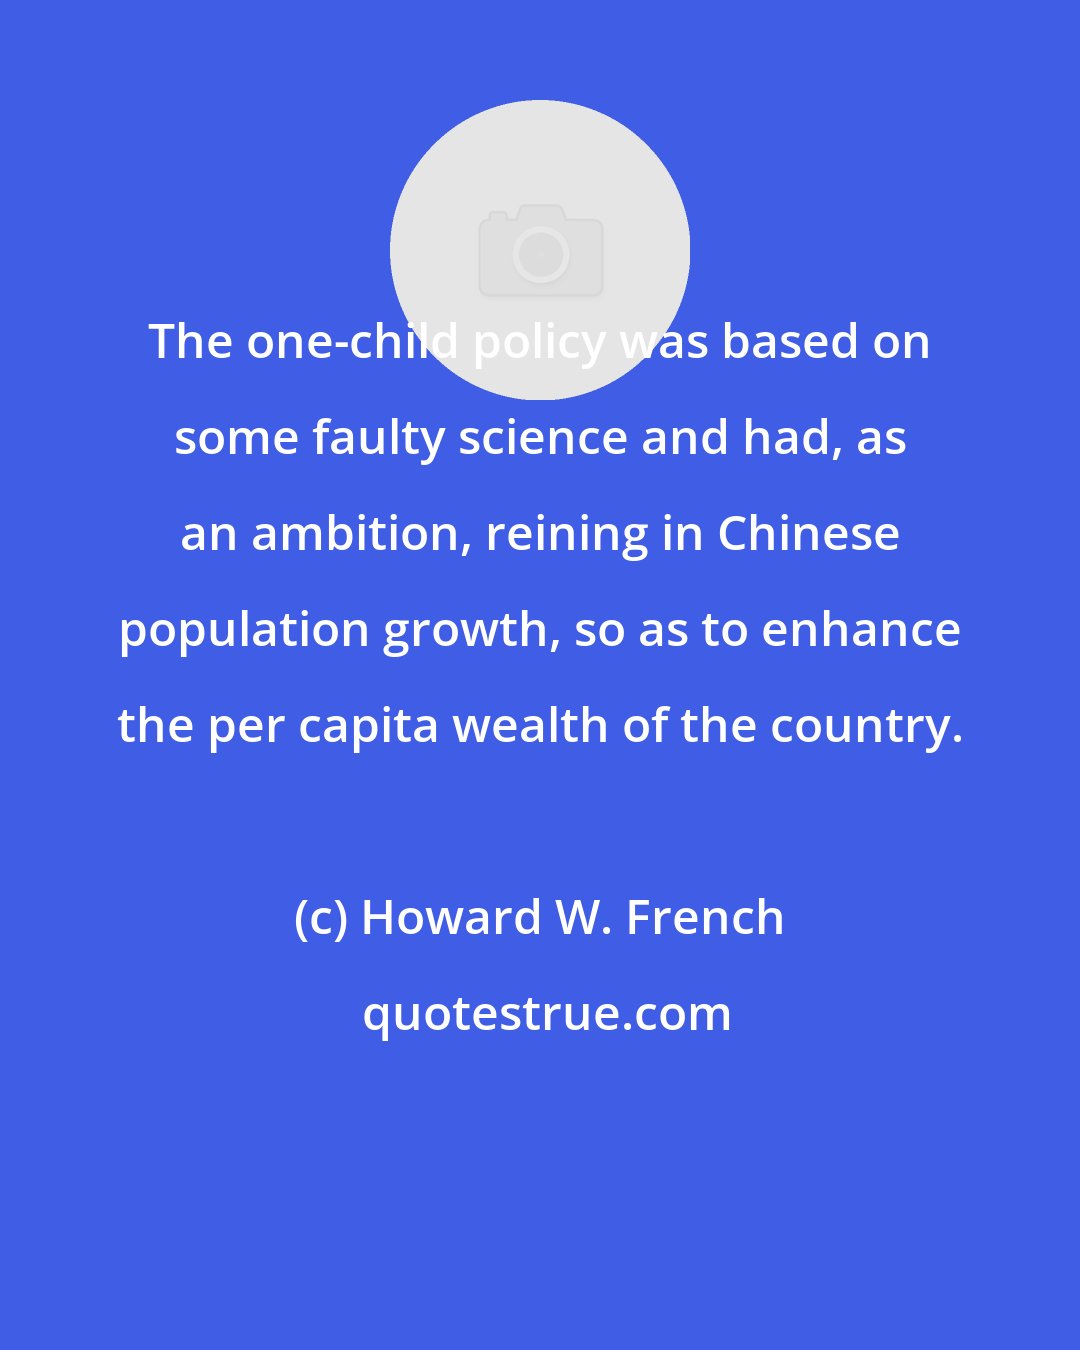 Howard W. French: The one-child policy was based on some faulty science and had, as an ambition, reining in Chinese population growth, so as to enhance the per capita wealth of the country.